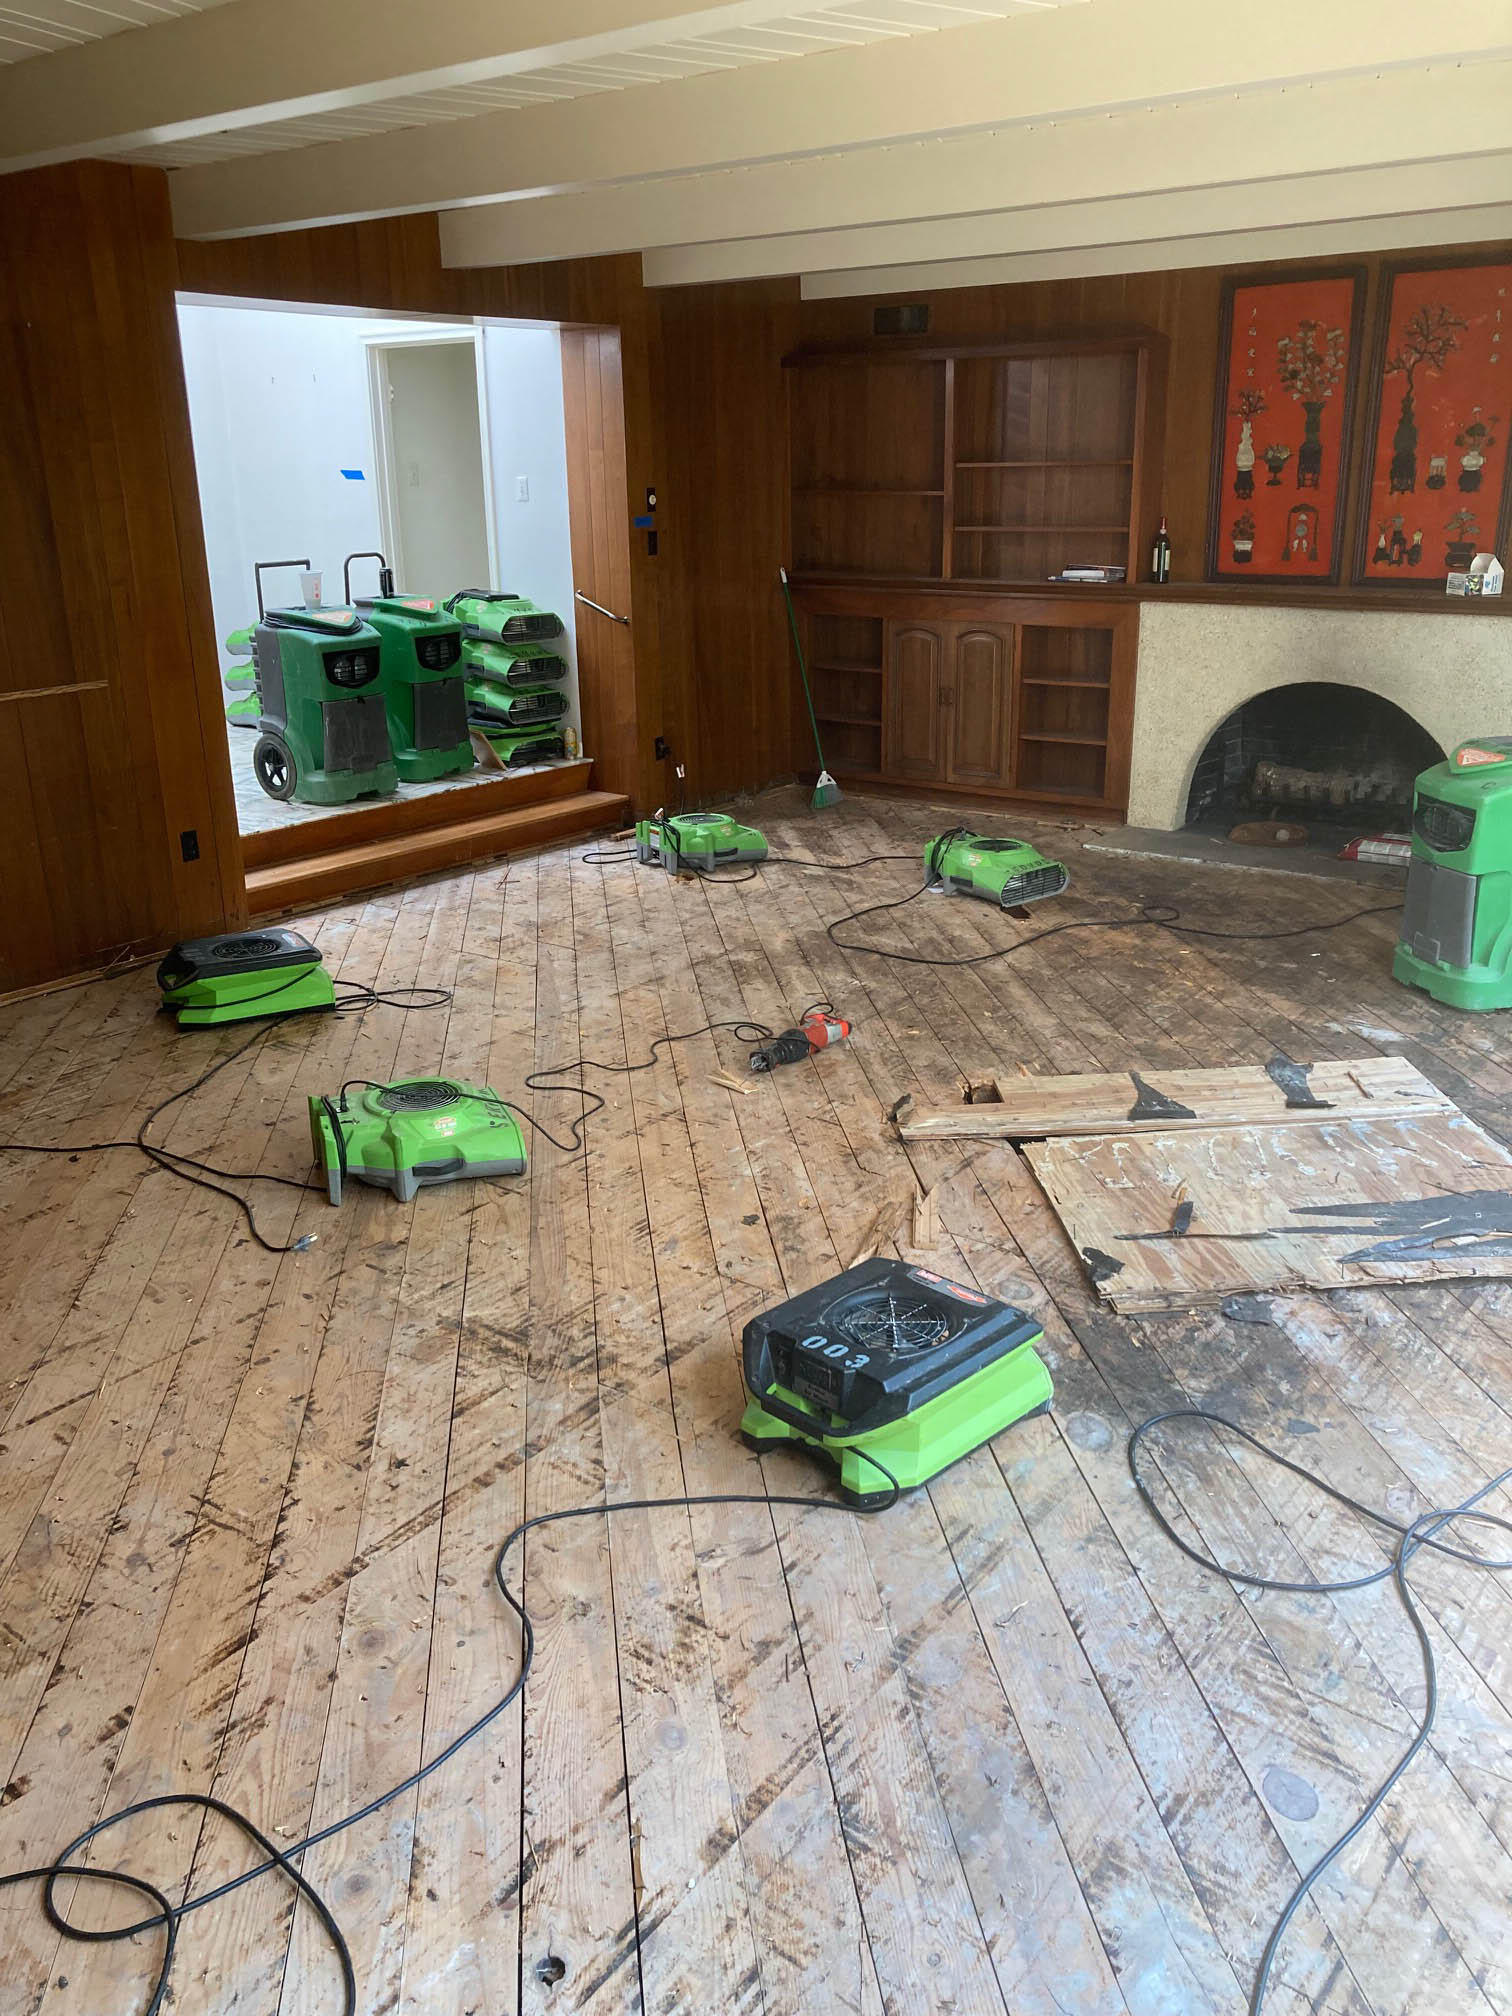 SERVPRO of South Garland will swiftly and efficiently restore your residential or commercial property to its pre-loss state. Water damage emergency services are available 24 hours a day, seven days a week.